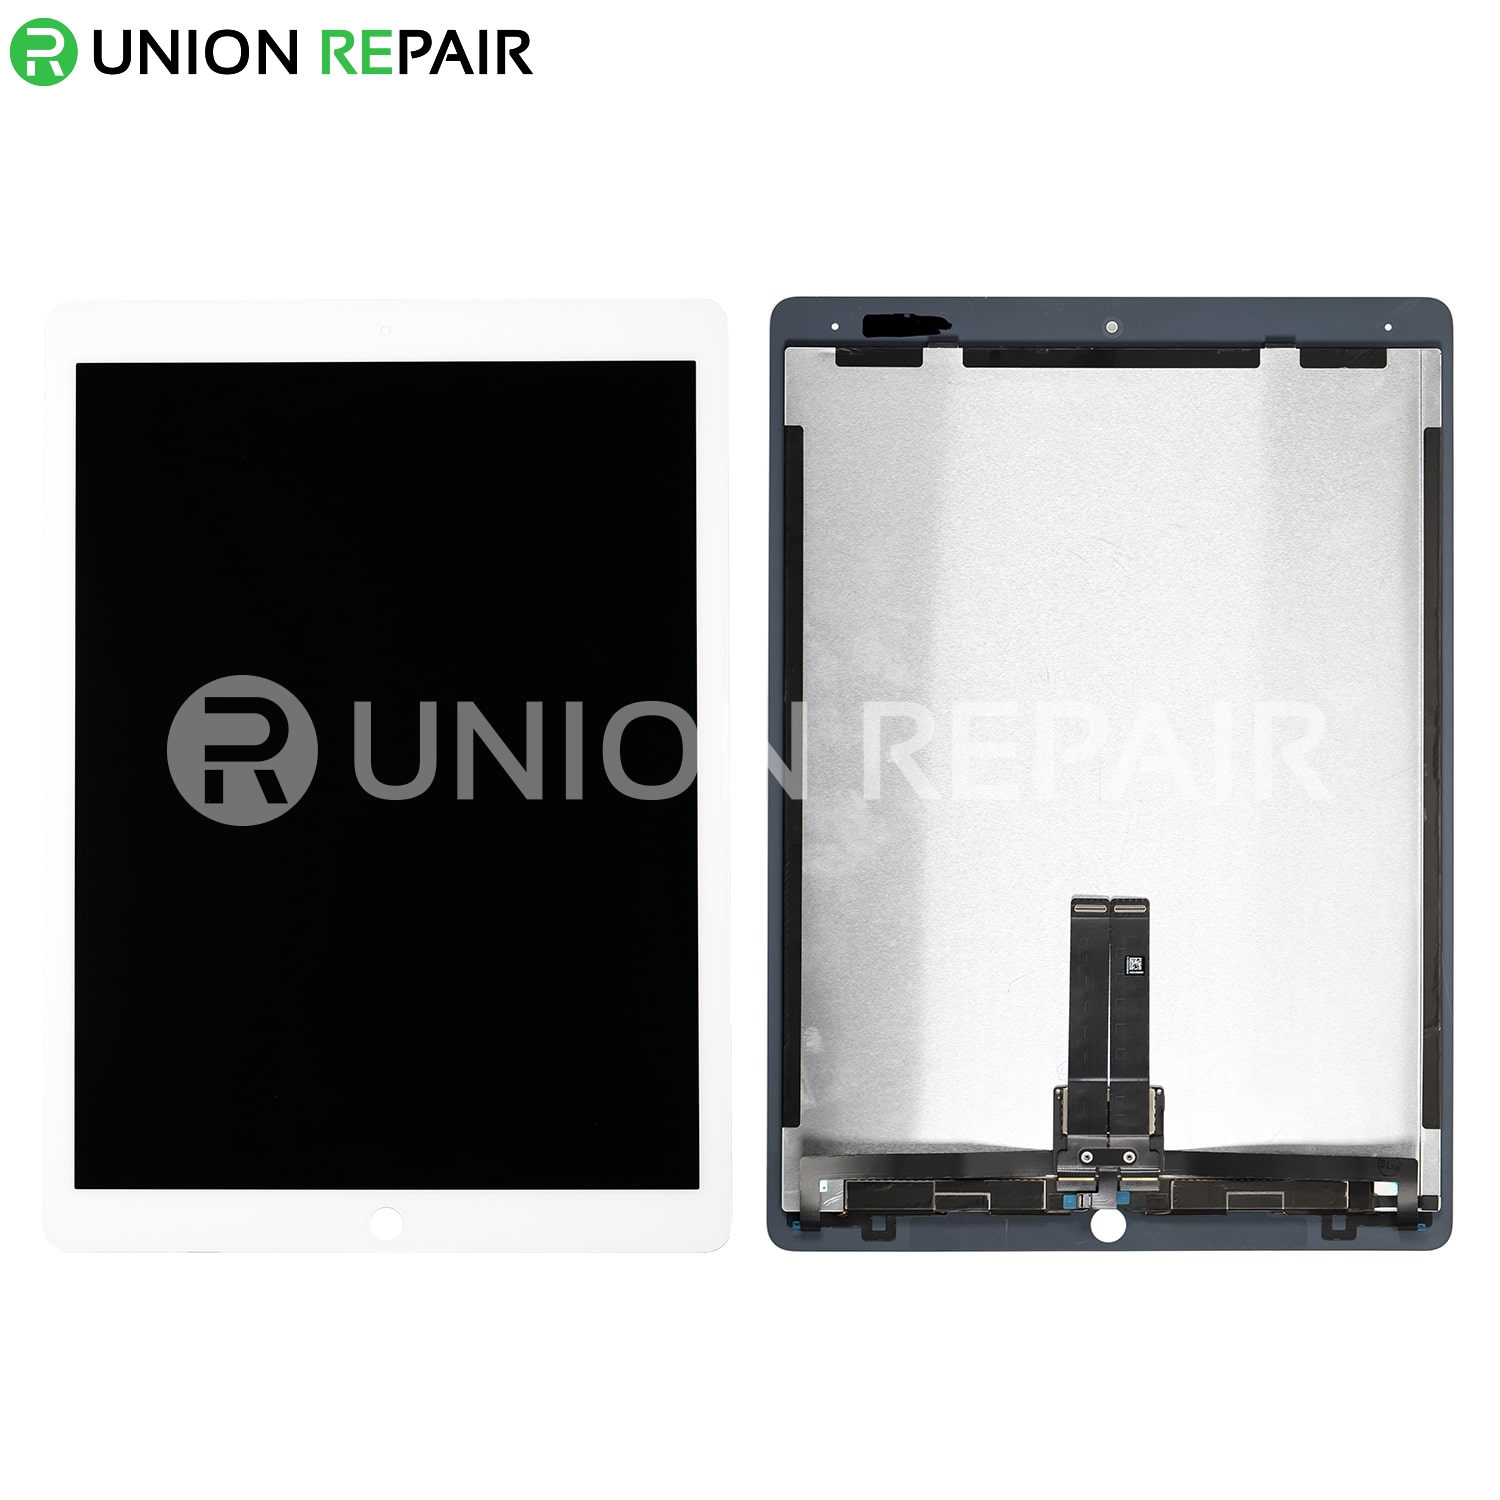 iPad 7/iPad 8/iPad 9 (Best Quality) Digitizer Touch Screen without Home  Button Replacement Part - White